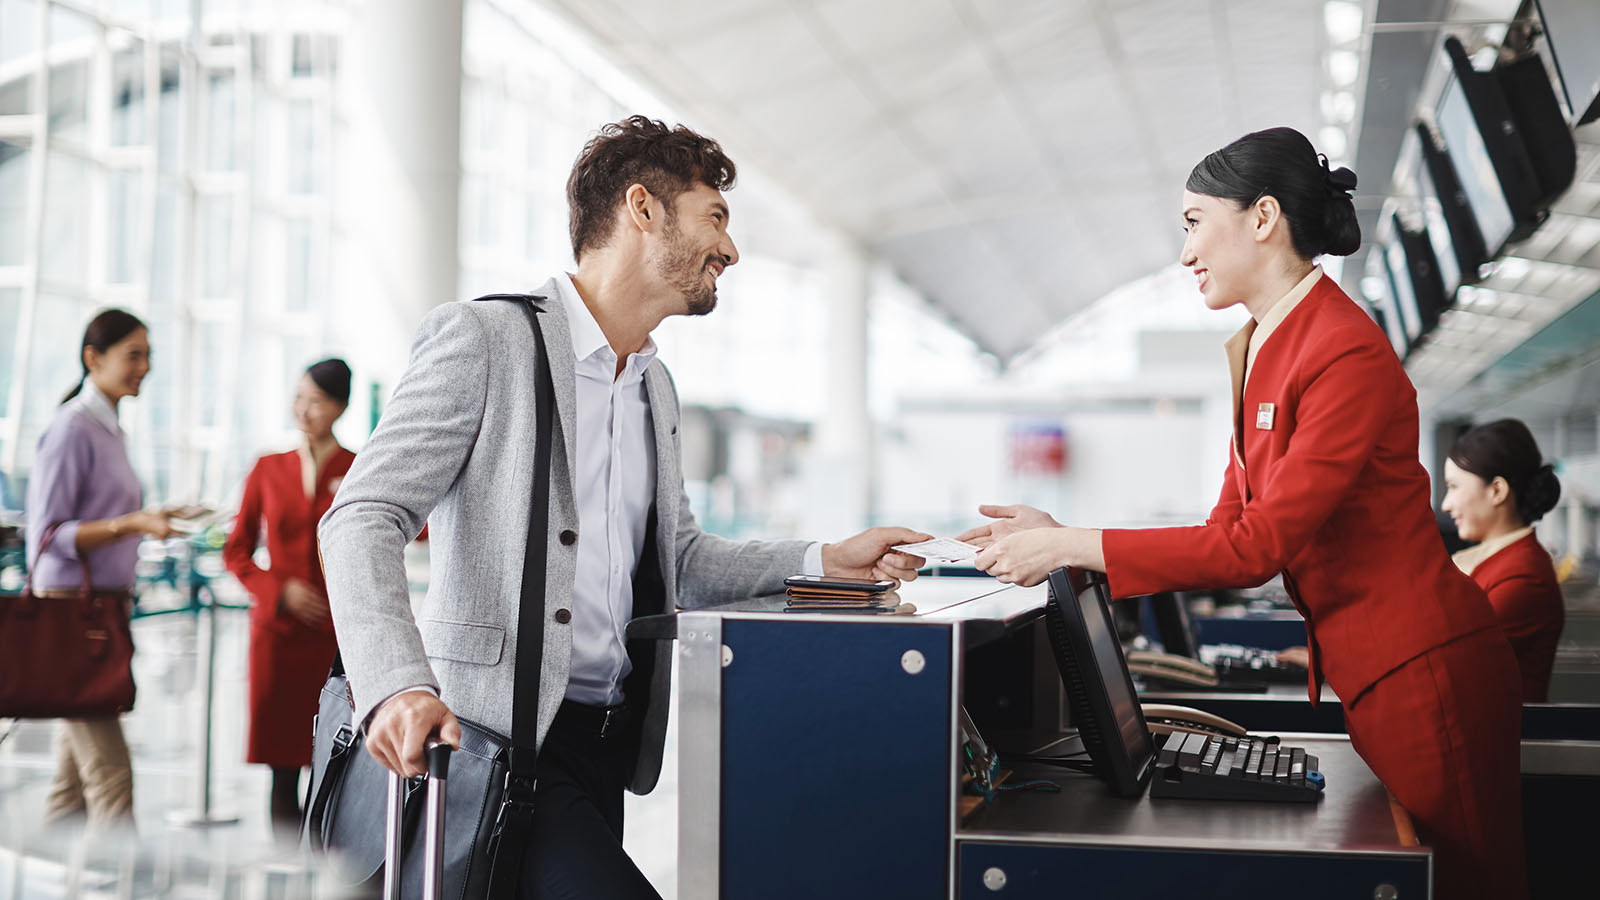 Cathay Silver, Gold and Platinum members get priority check-in.